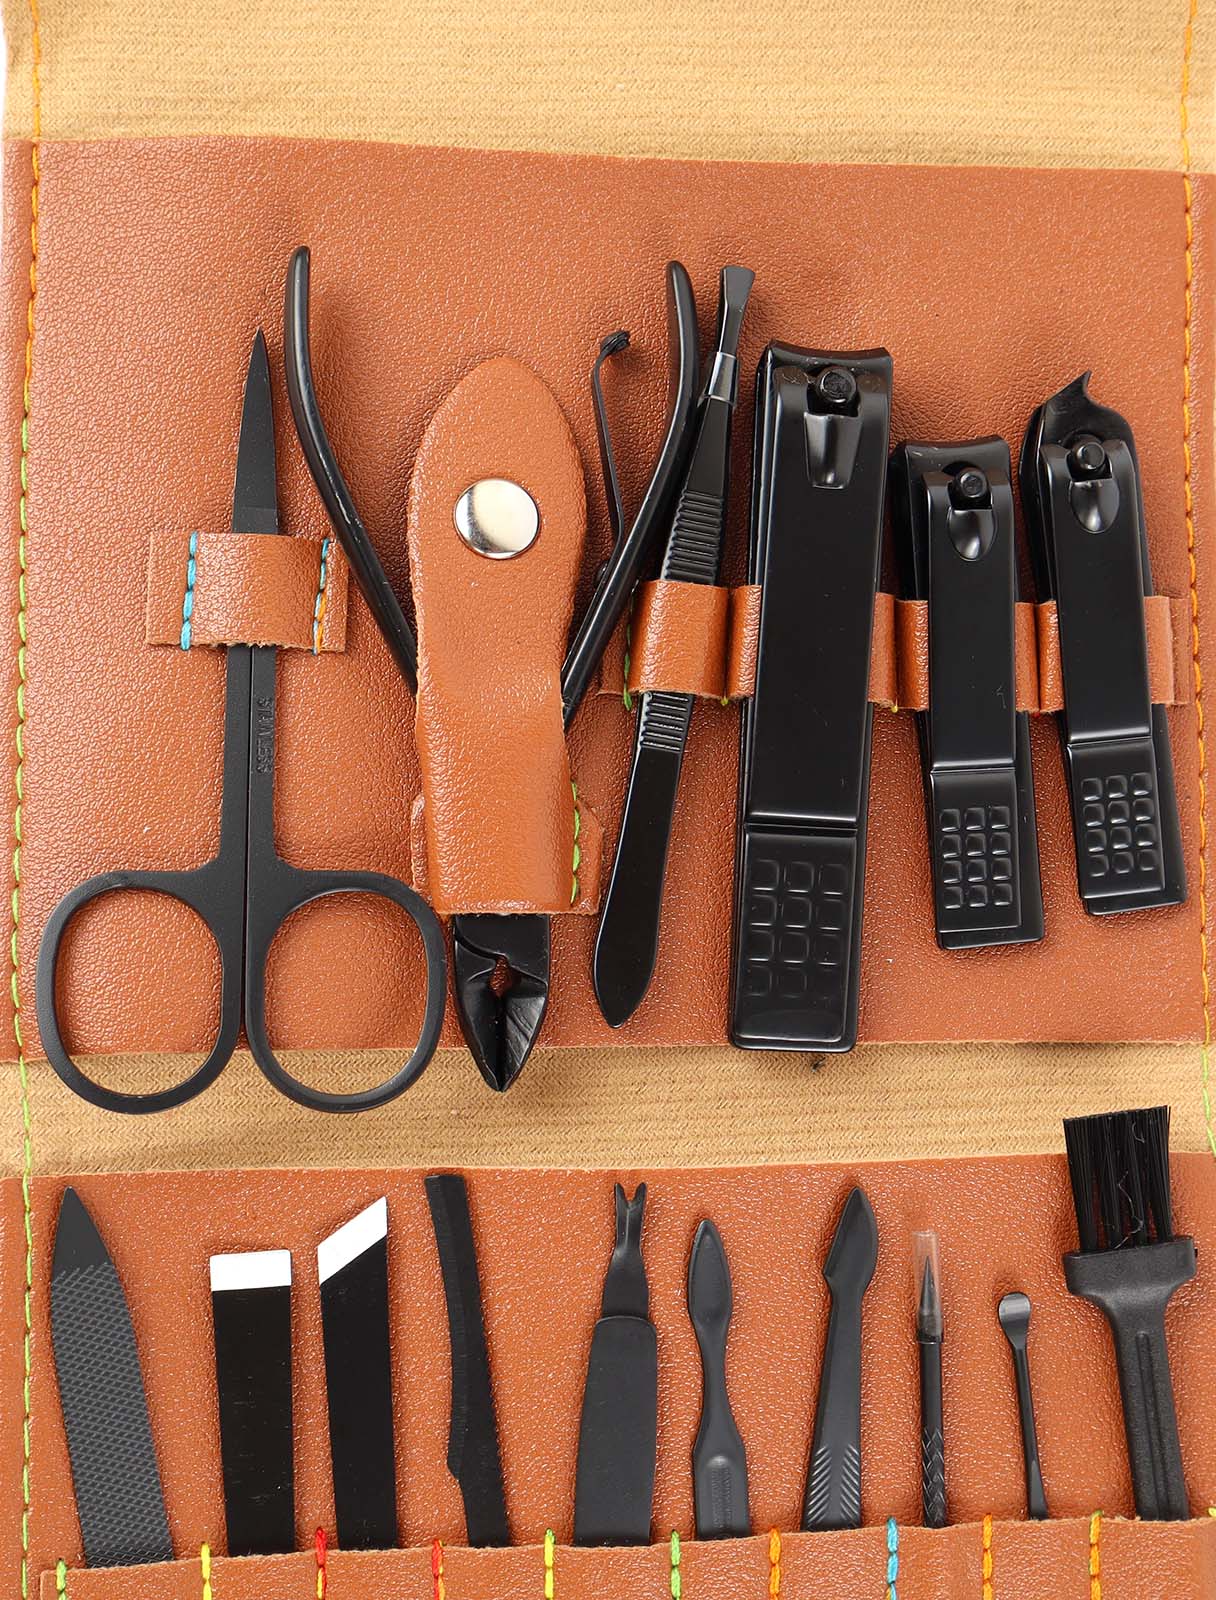 16-piece nail clipper set with a leather case